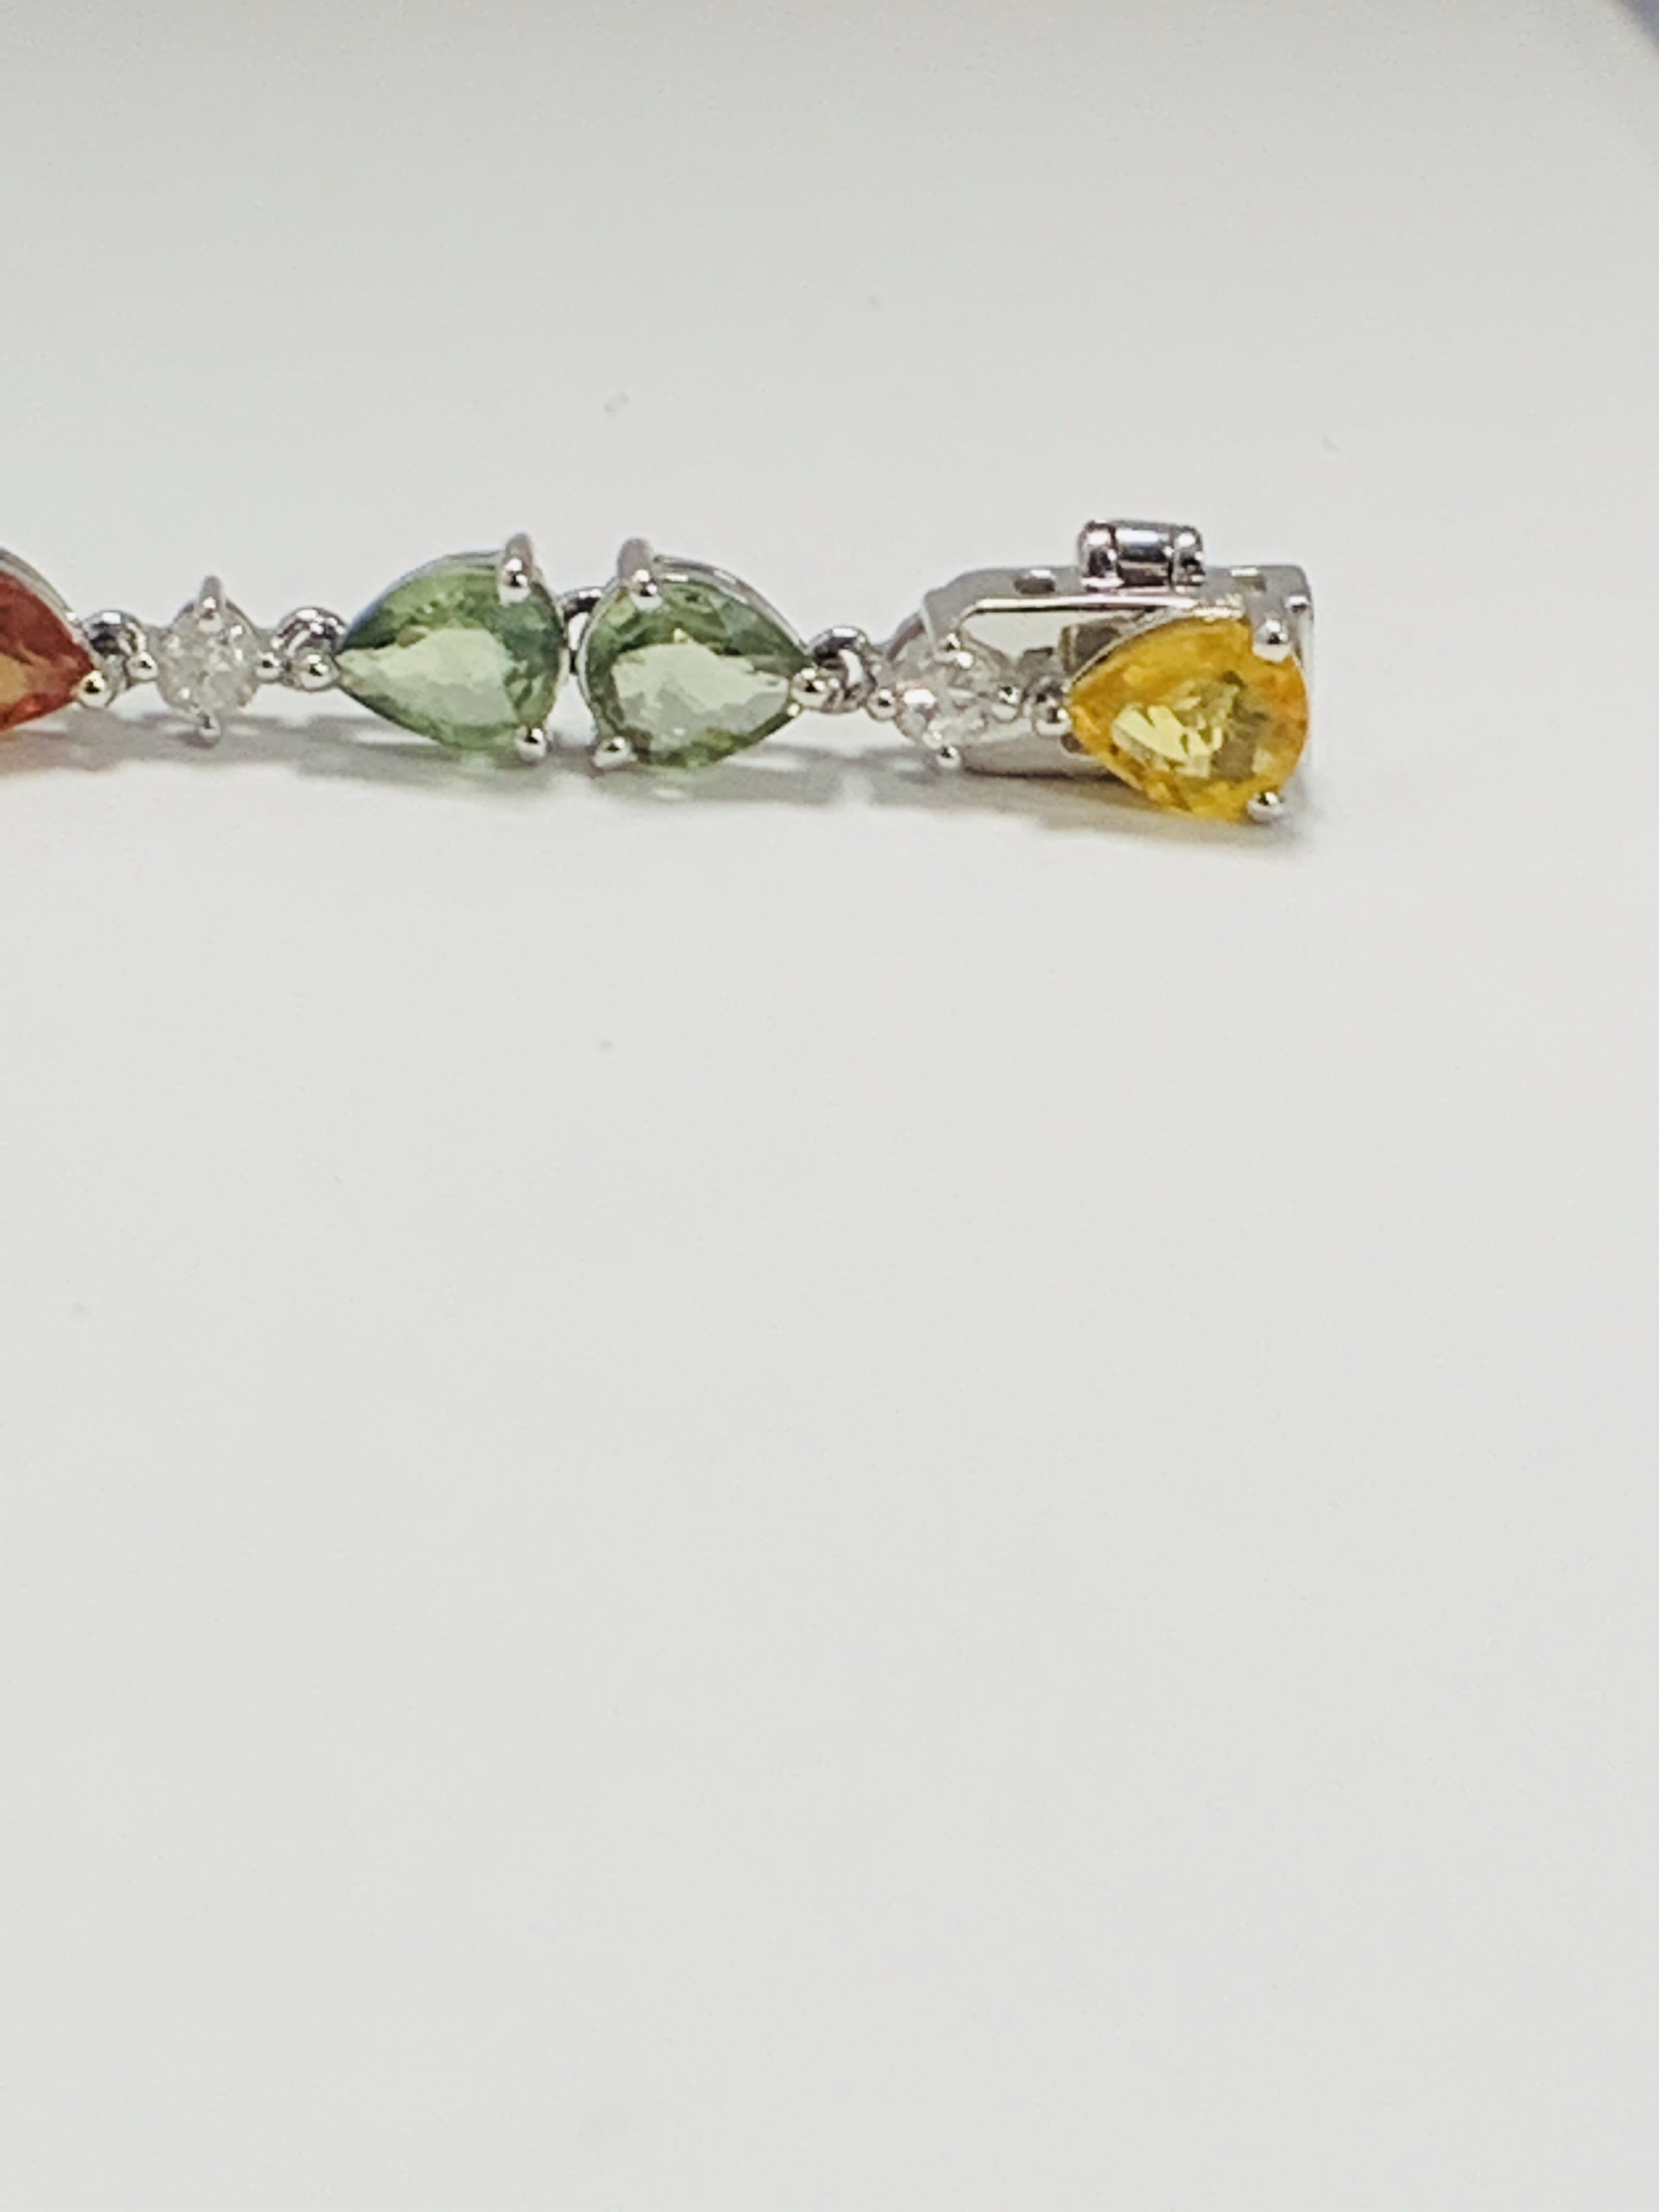 14ct White Gold Sapphire and Diamond bracelet featuring, 22 pear cut, yellow, green and orange Sapph - Image 9 of 24